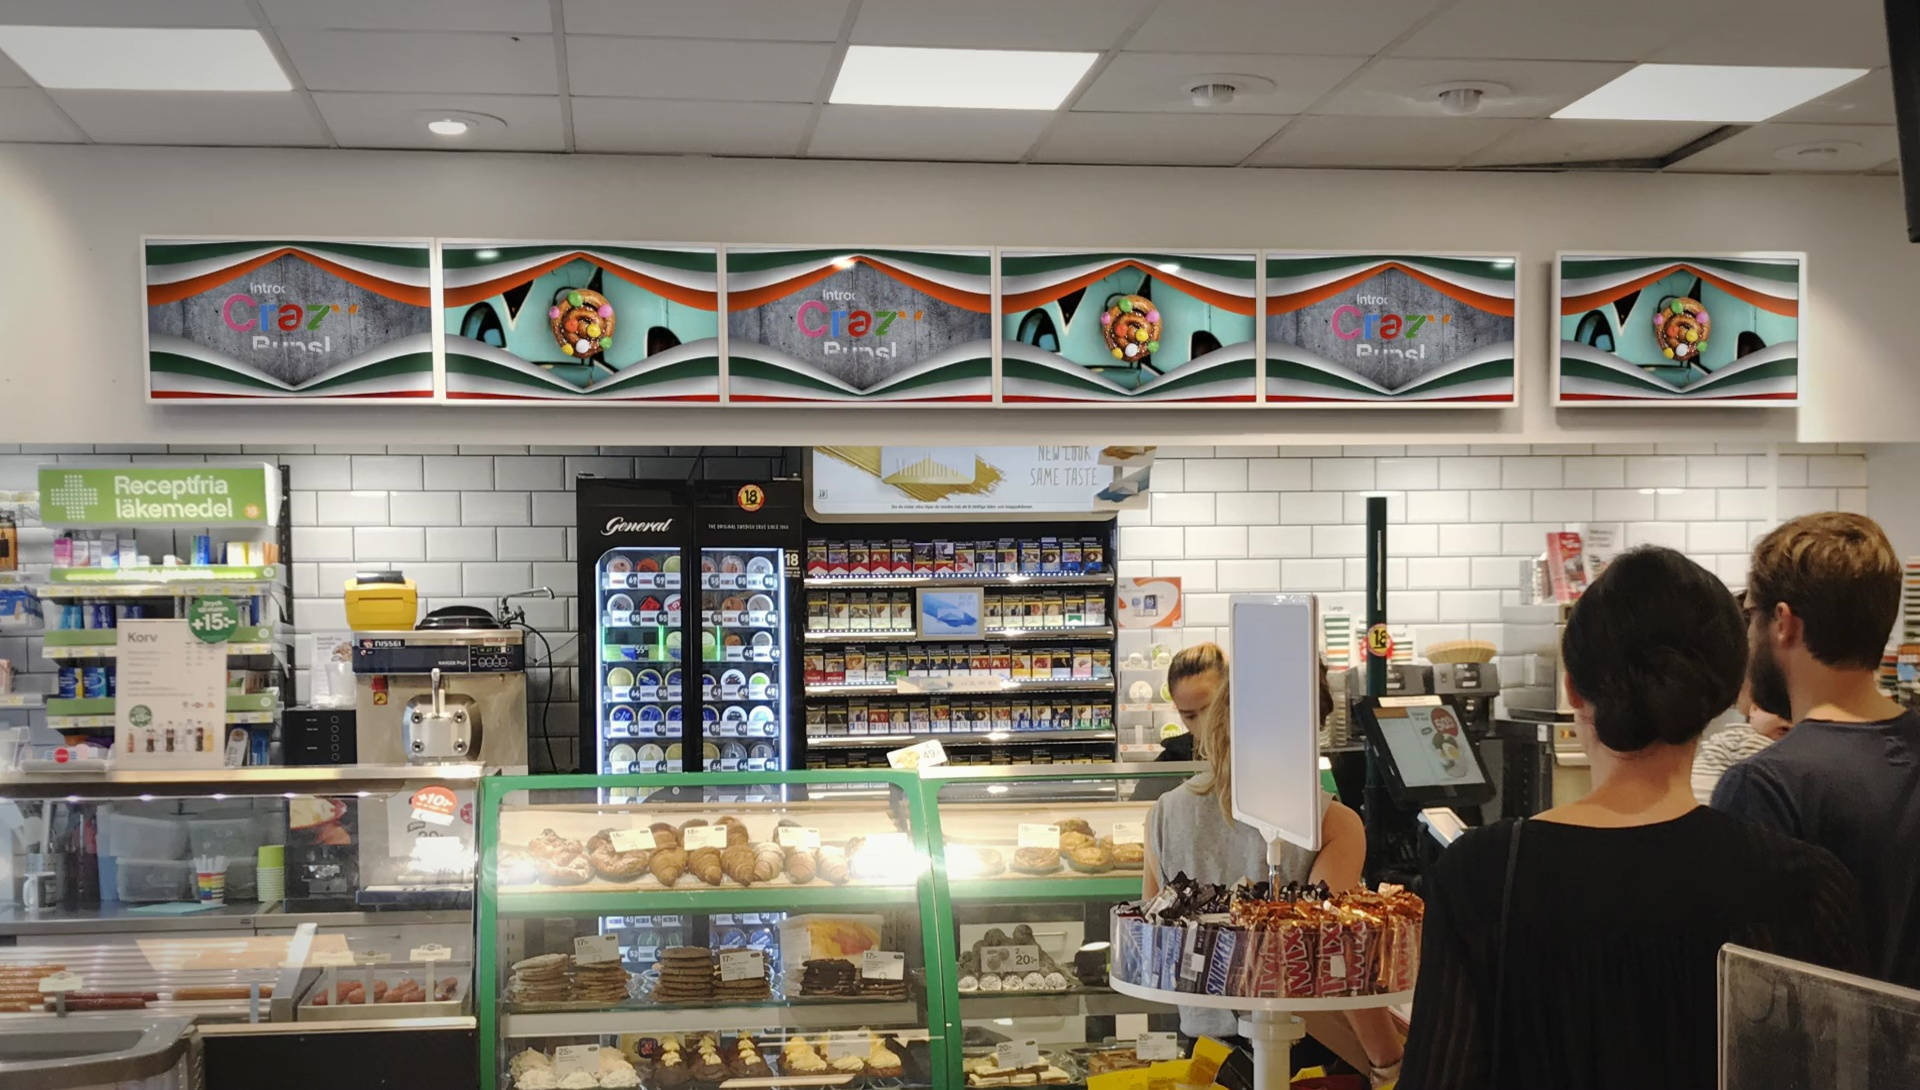 7 Eleven Store Counter Background